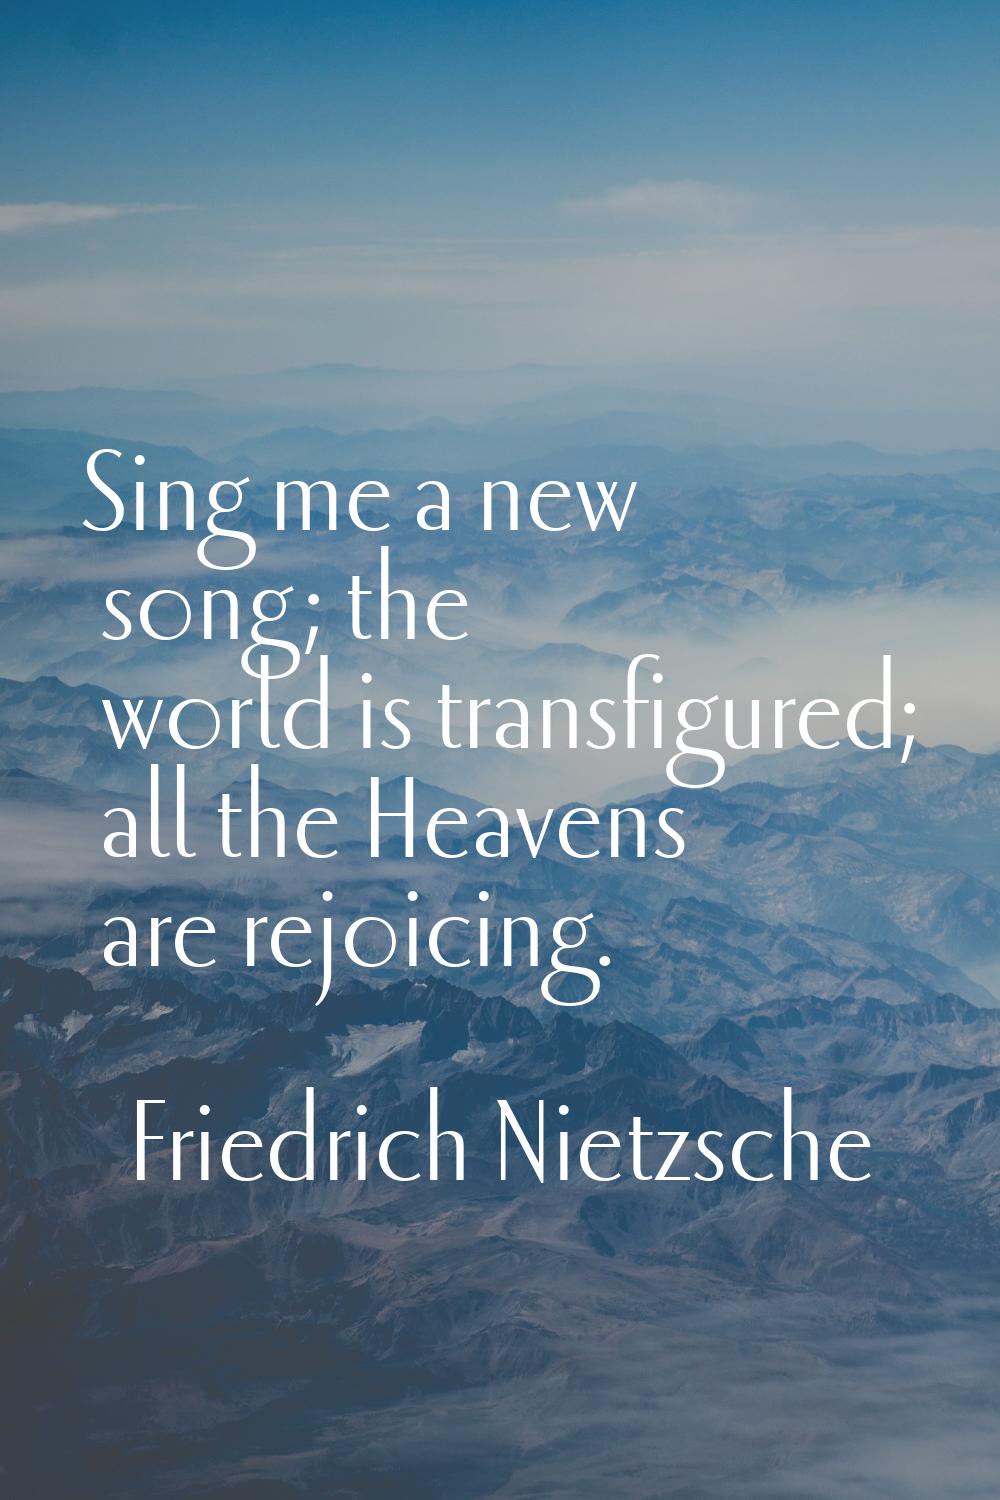 Sing me a new song; the world is transfigured; all the Heavens are rejoicing.